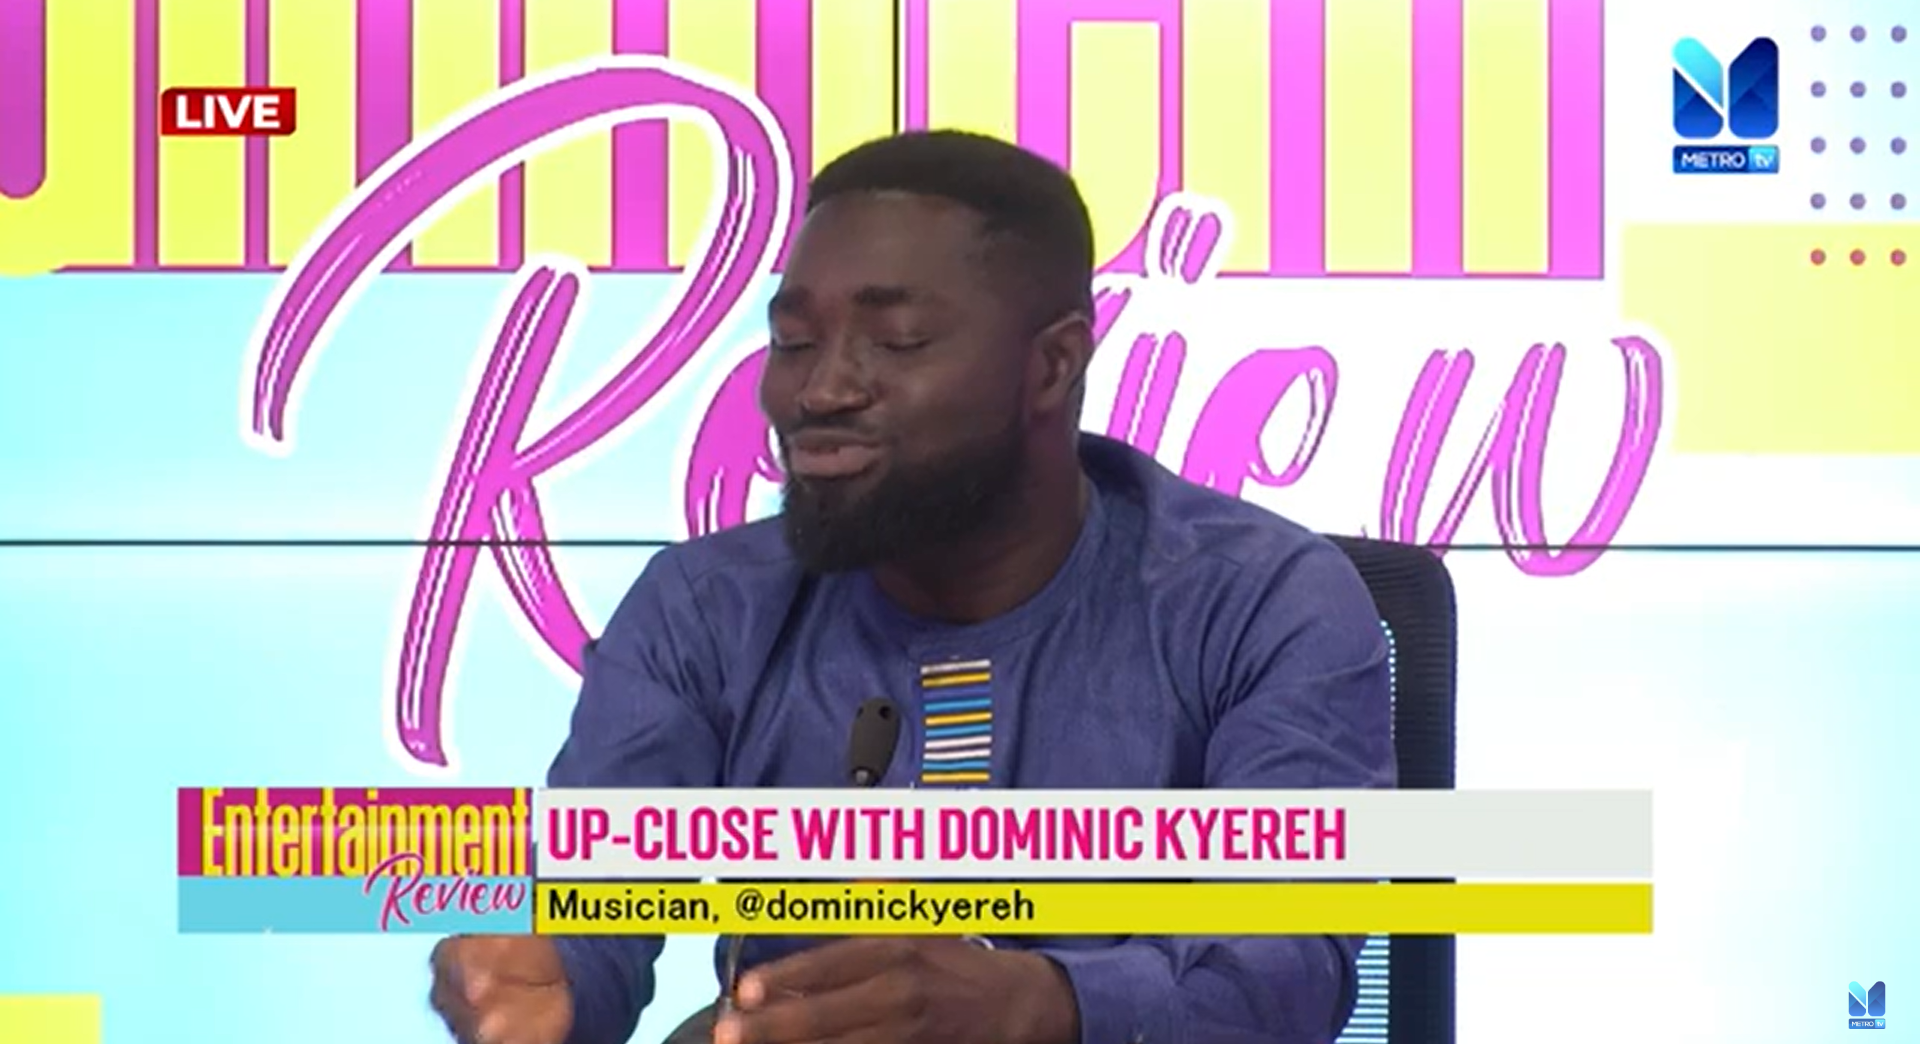 Dominic Kyereh says his music career is his ministry